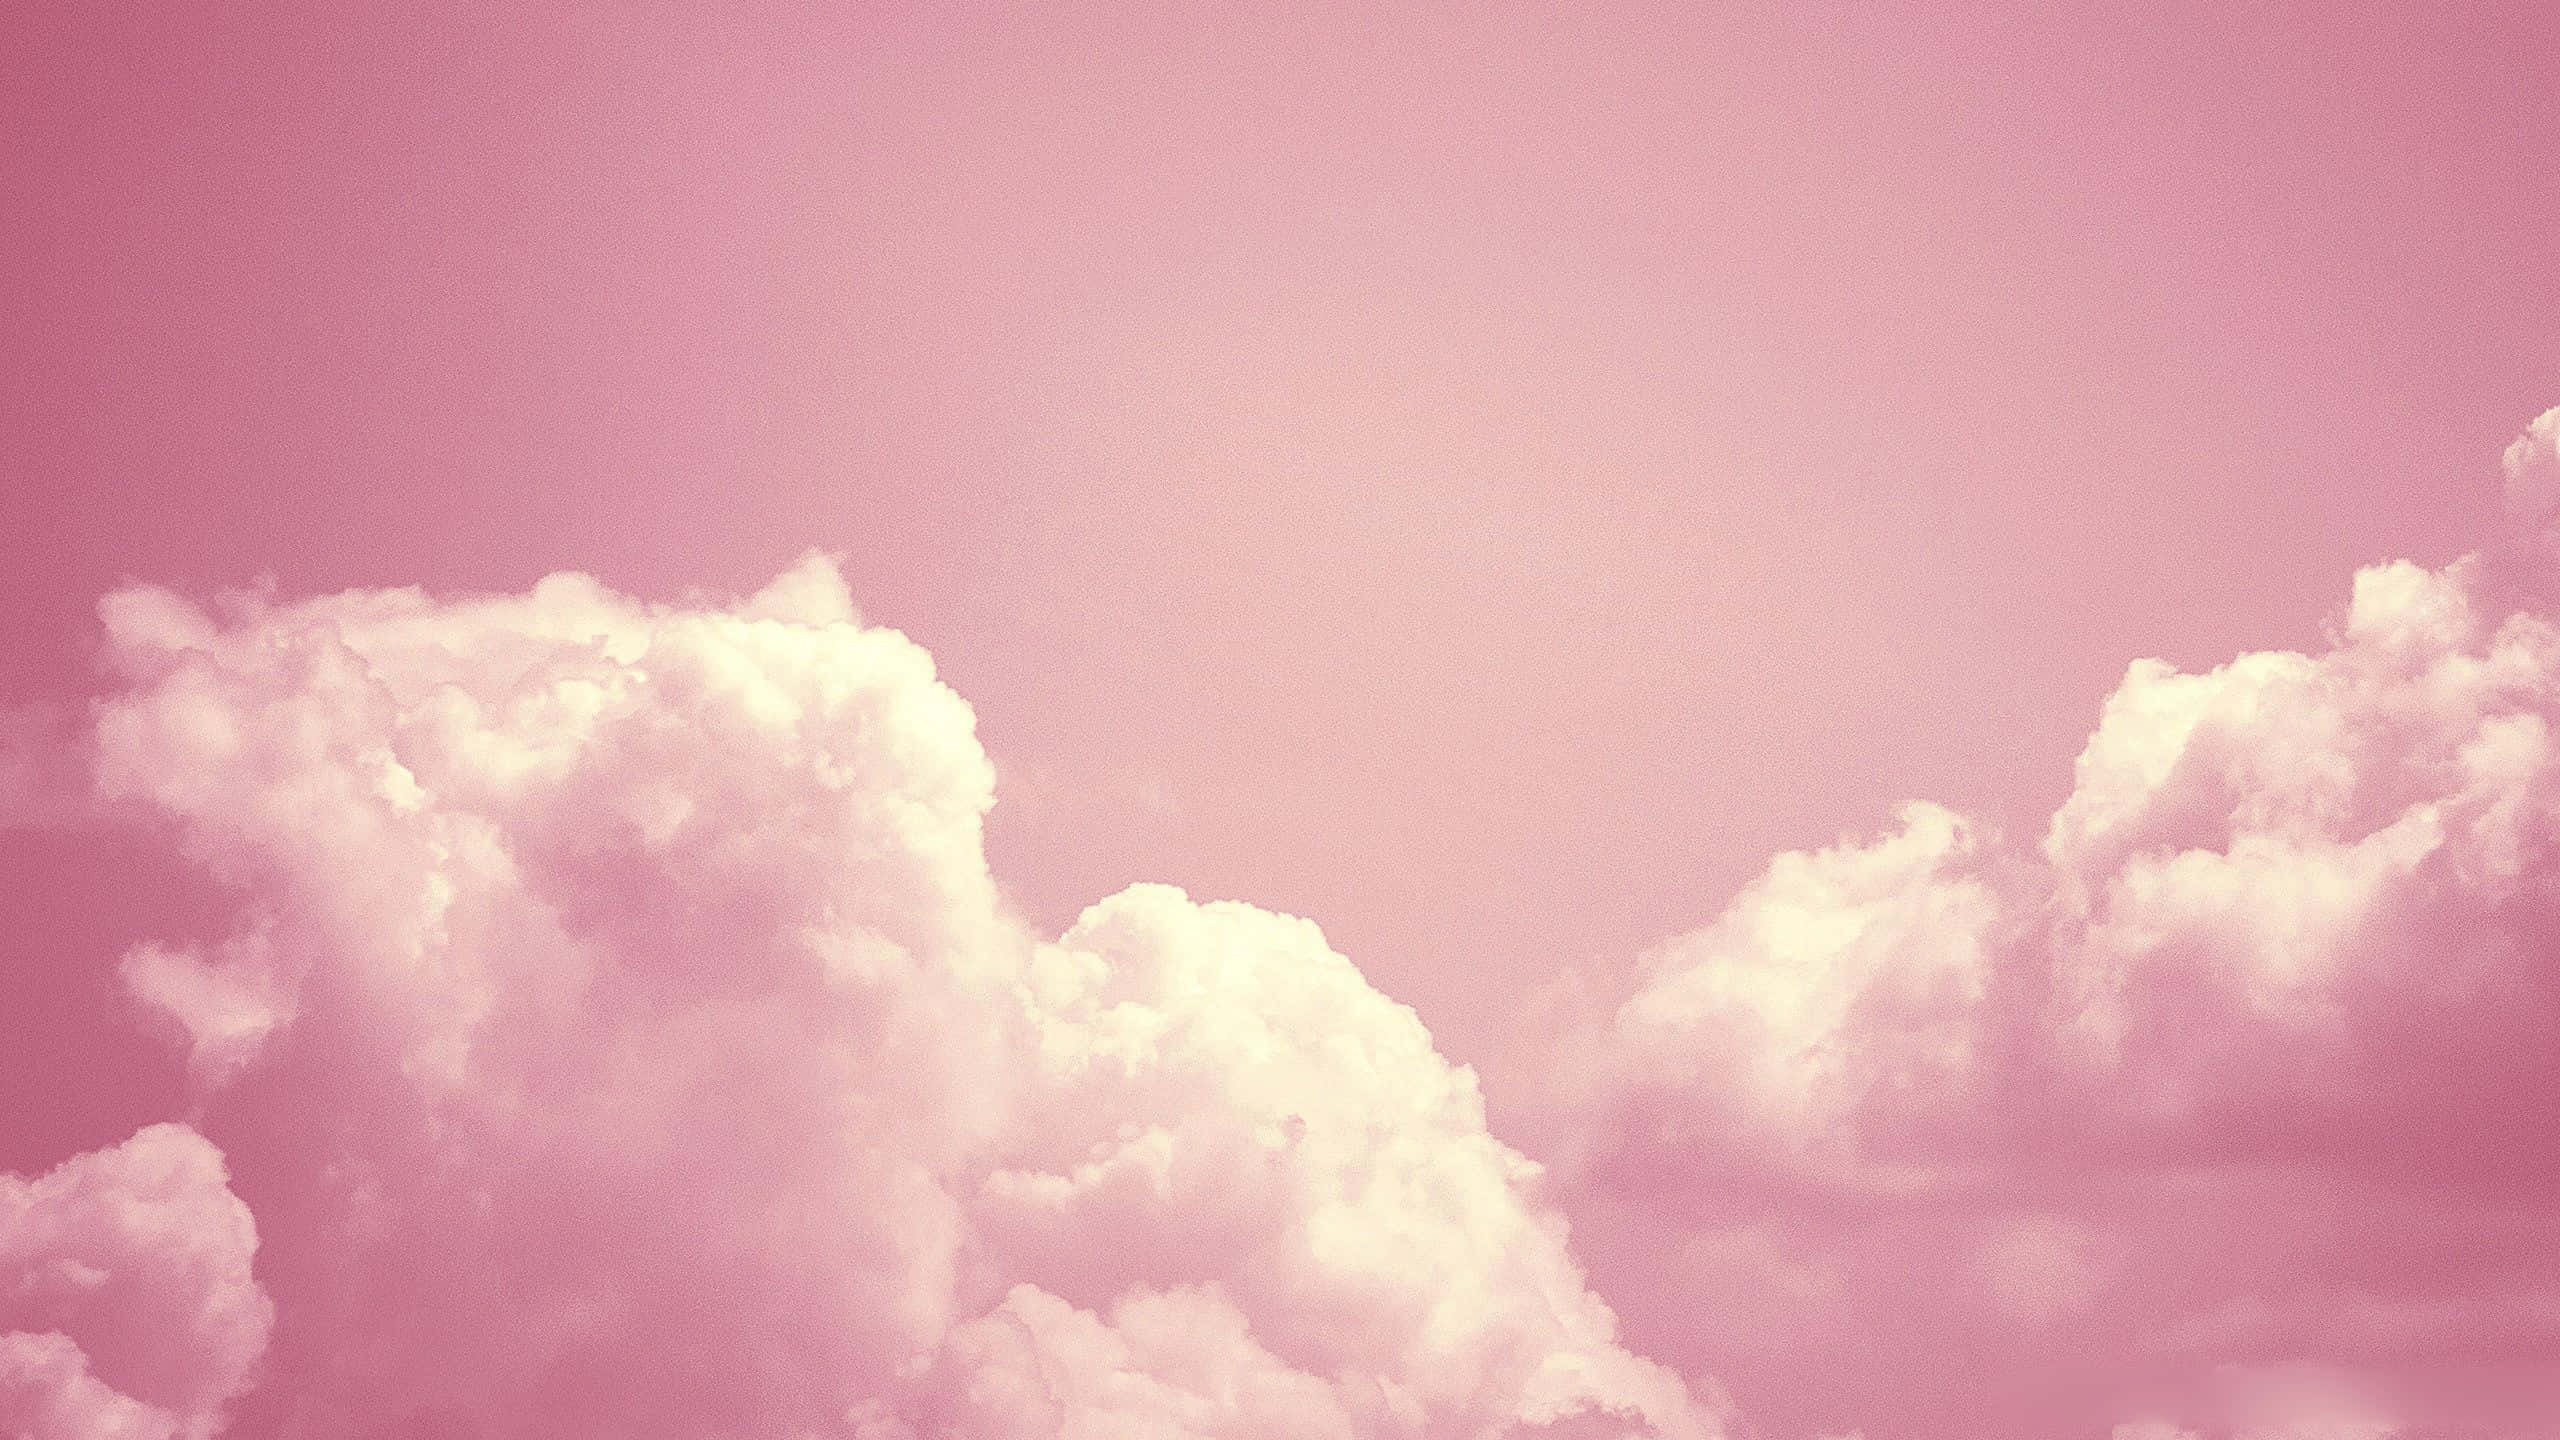 Download Create a Dreamy Pastel Pink Aesthetic | Wallpapers.com